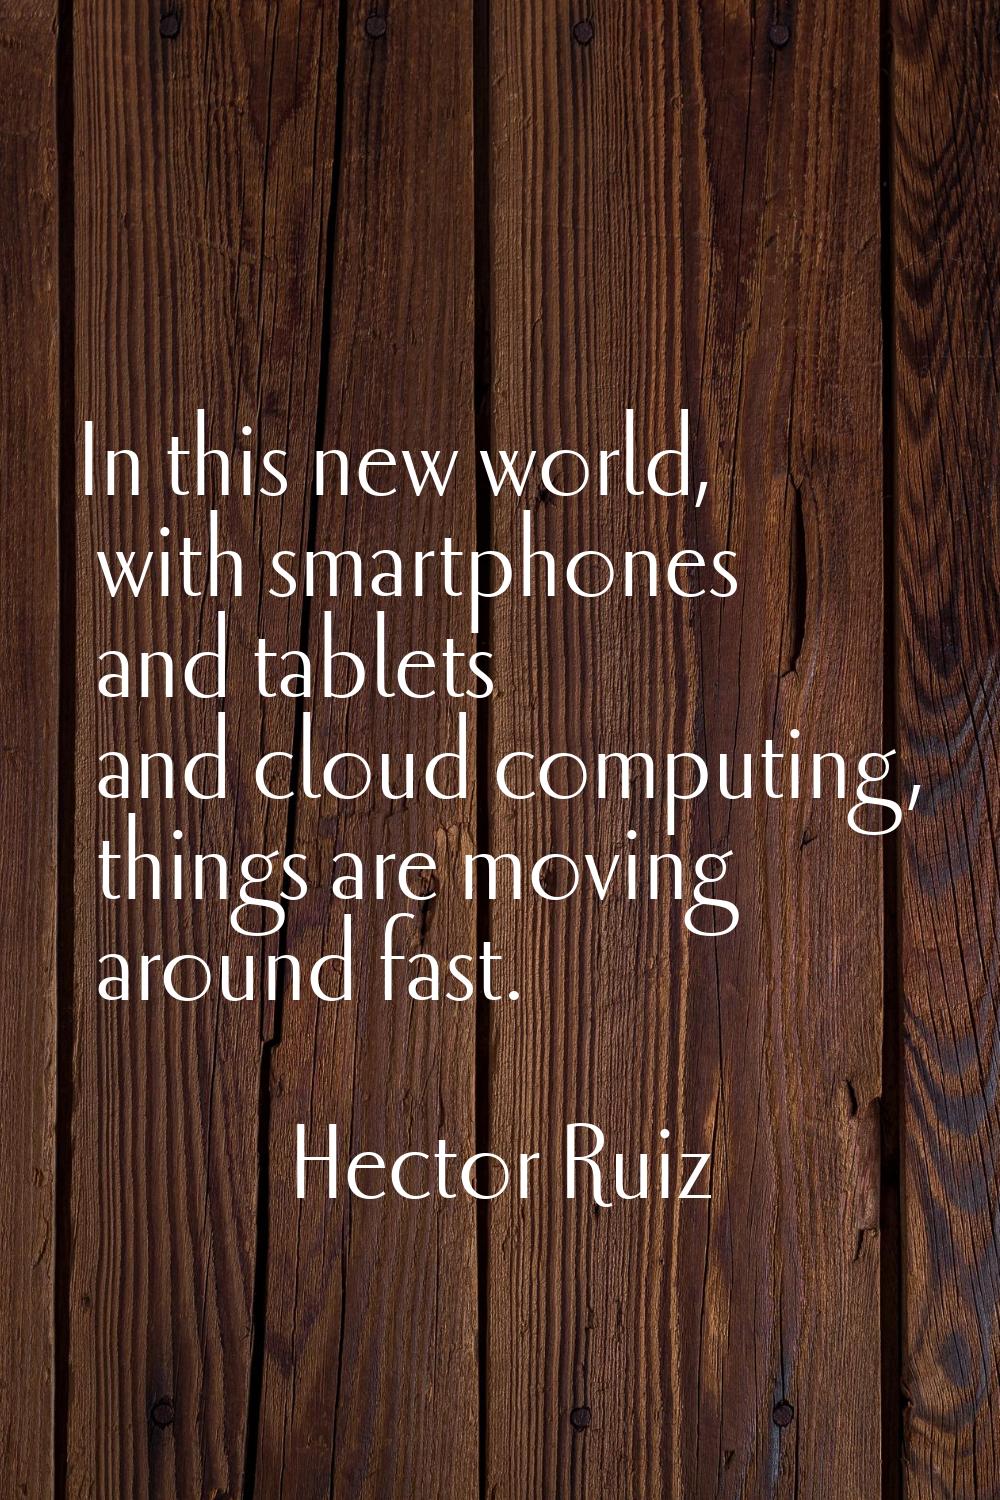 In this new world, with smartphones and tablets and cloud computing, things are moving around fast.